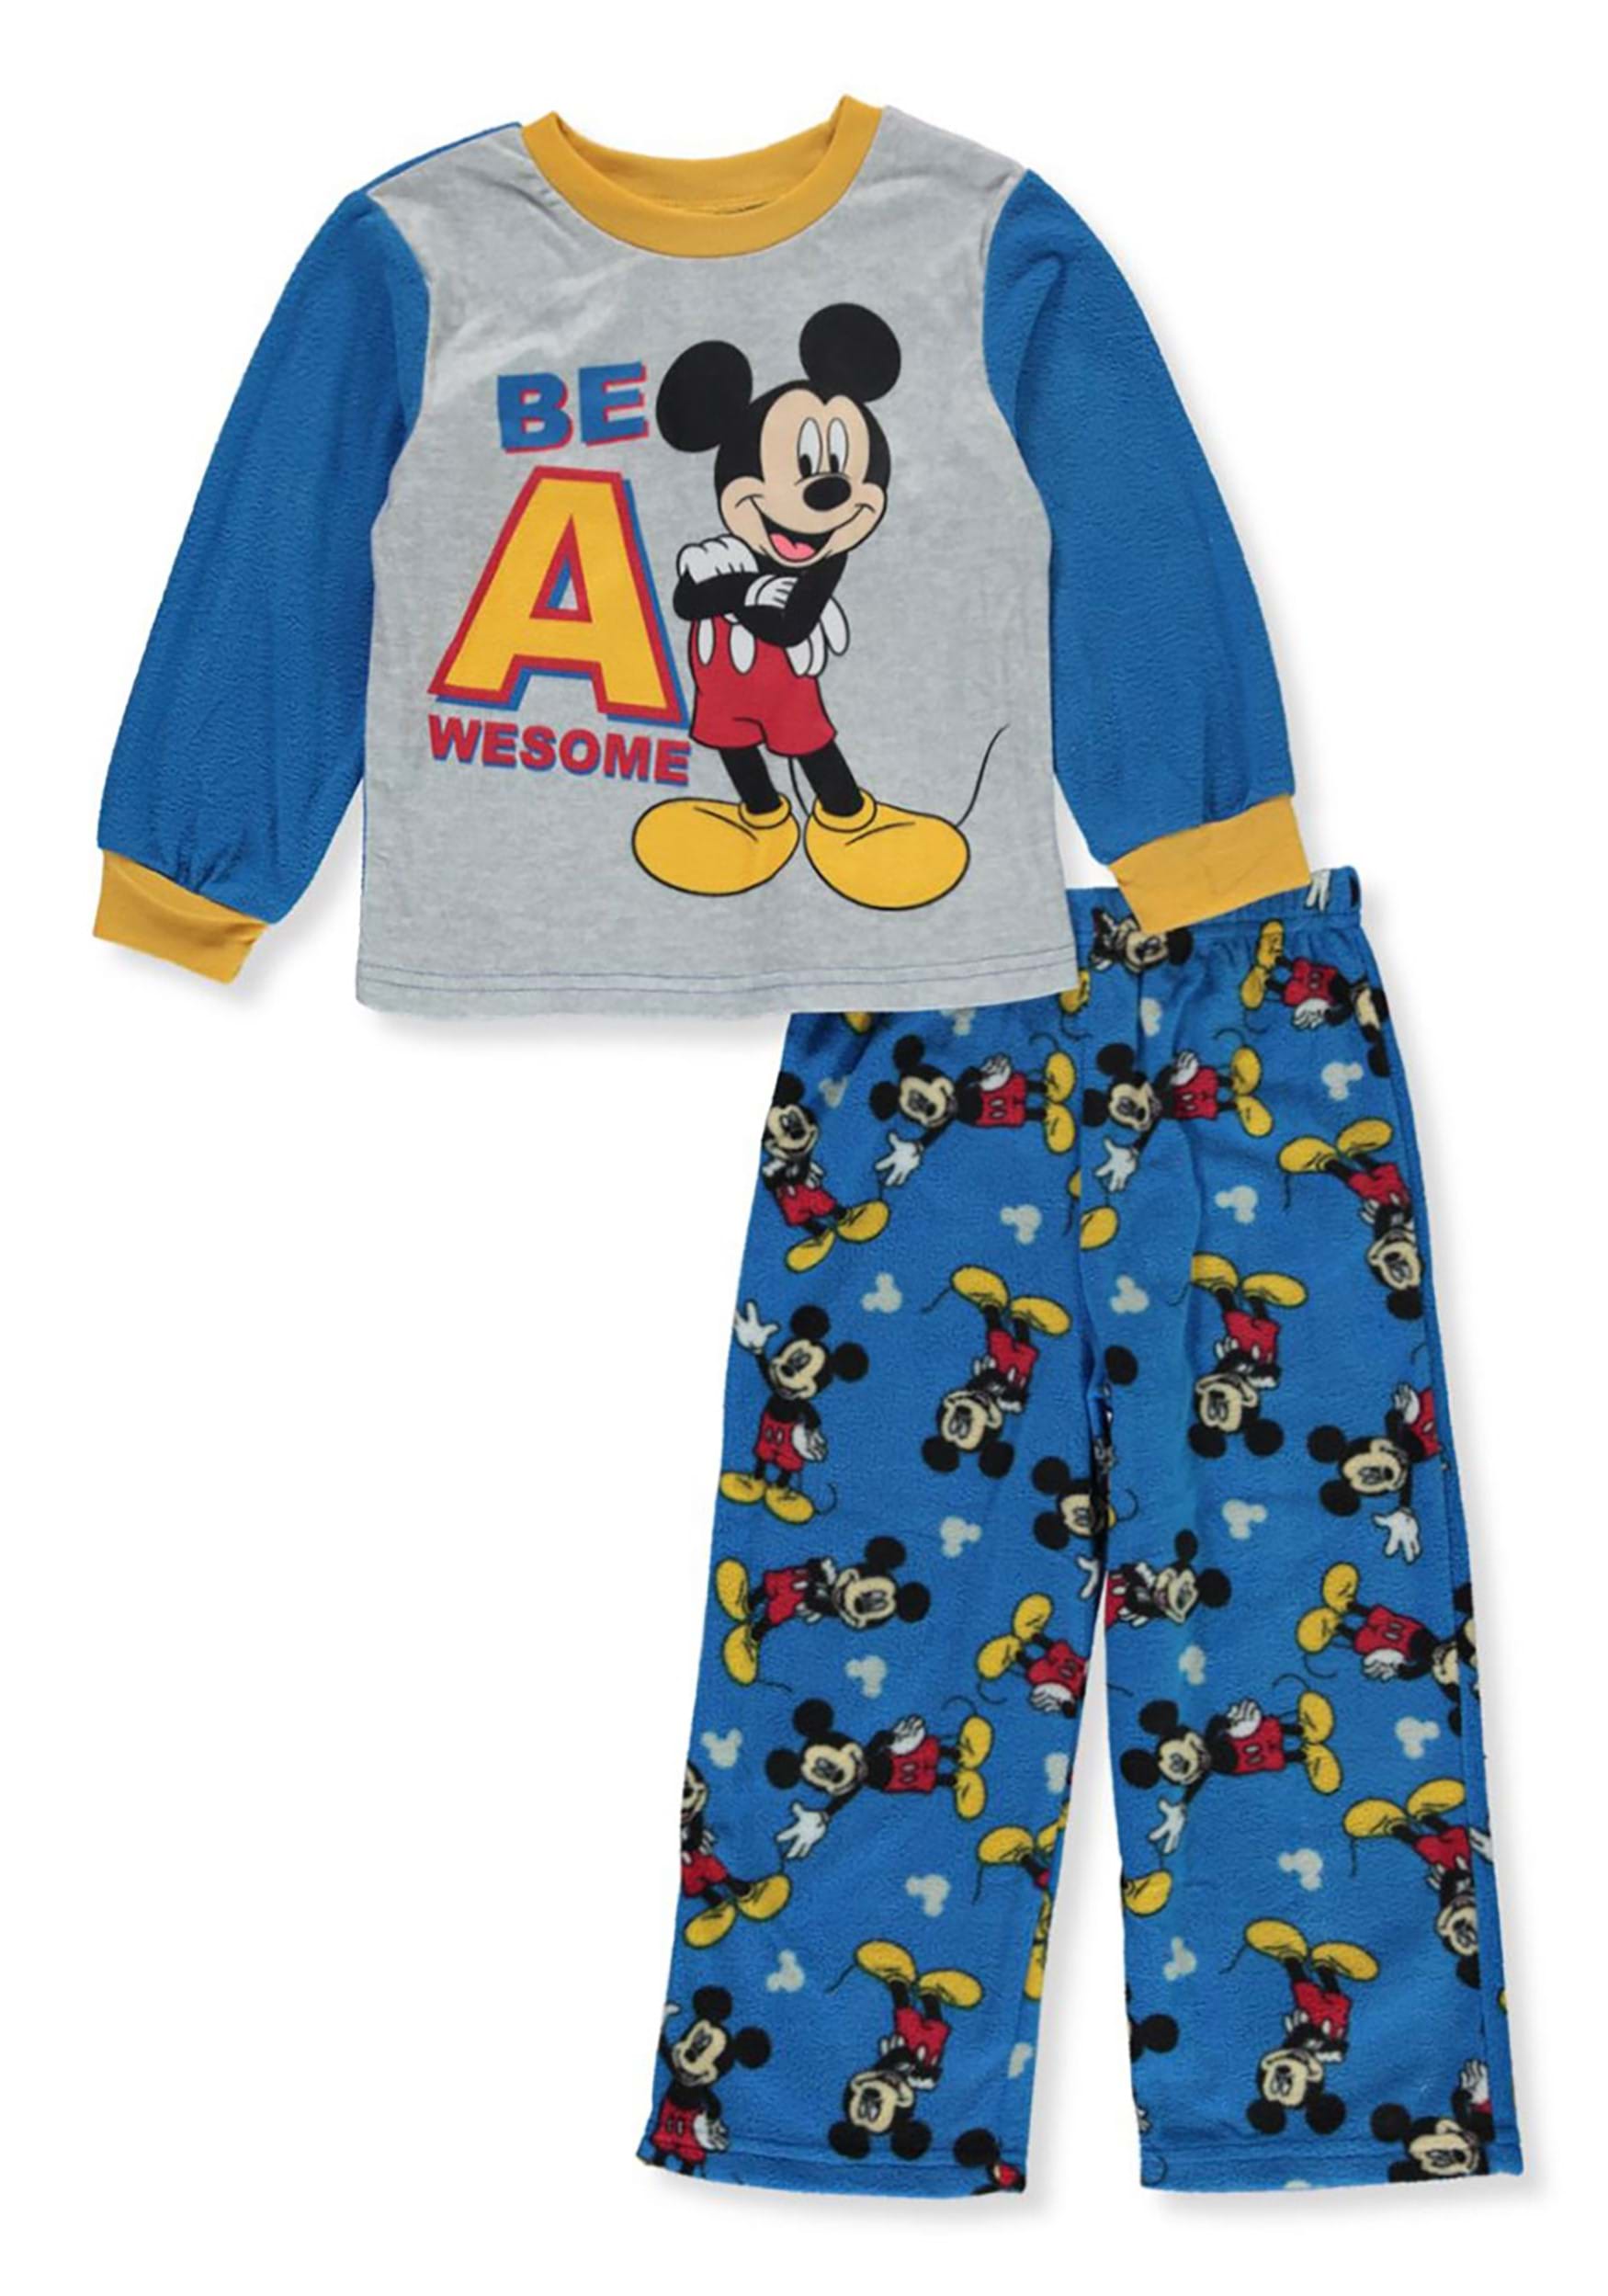 https://images.fun.com/products/79498/1-1/toddler-boys-funny-mouse-pajama-set.jpg